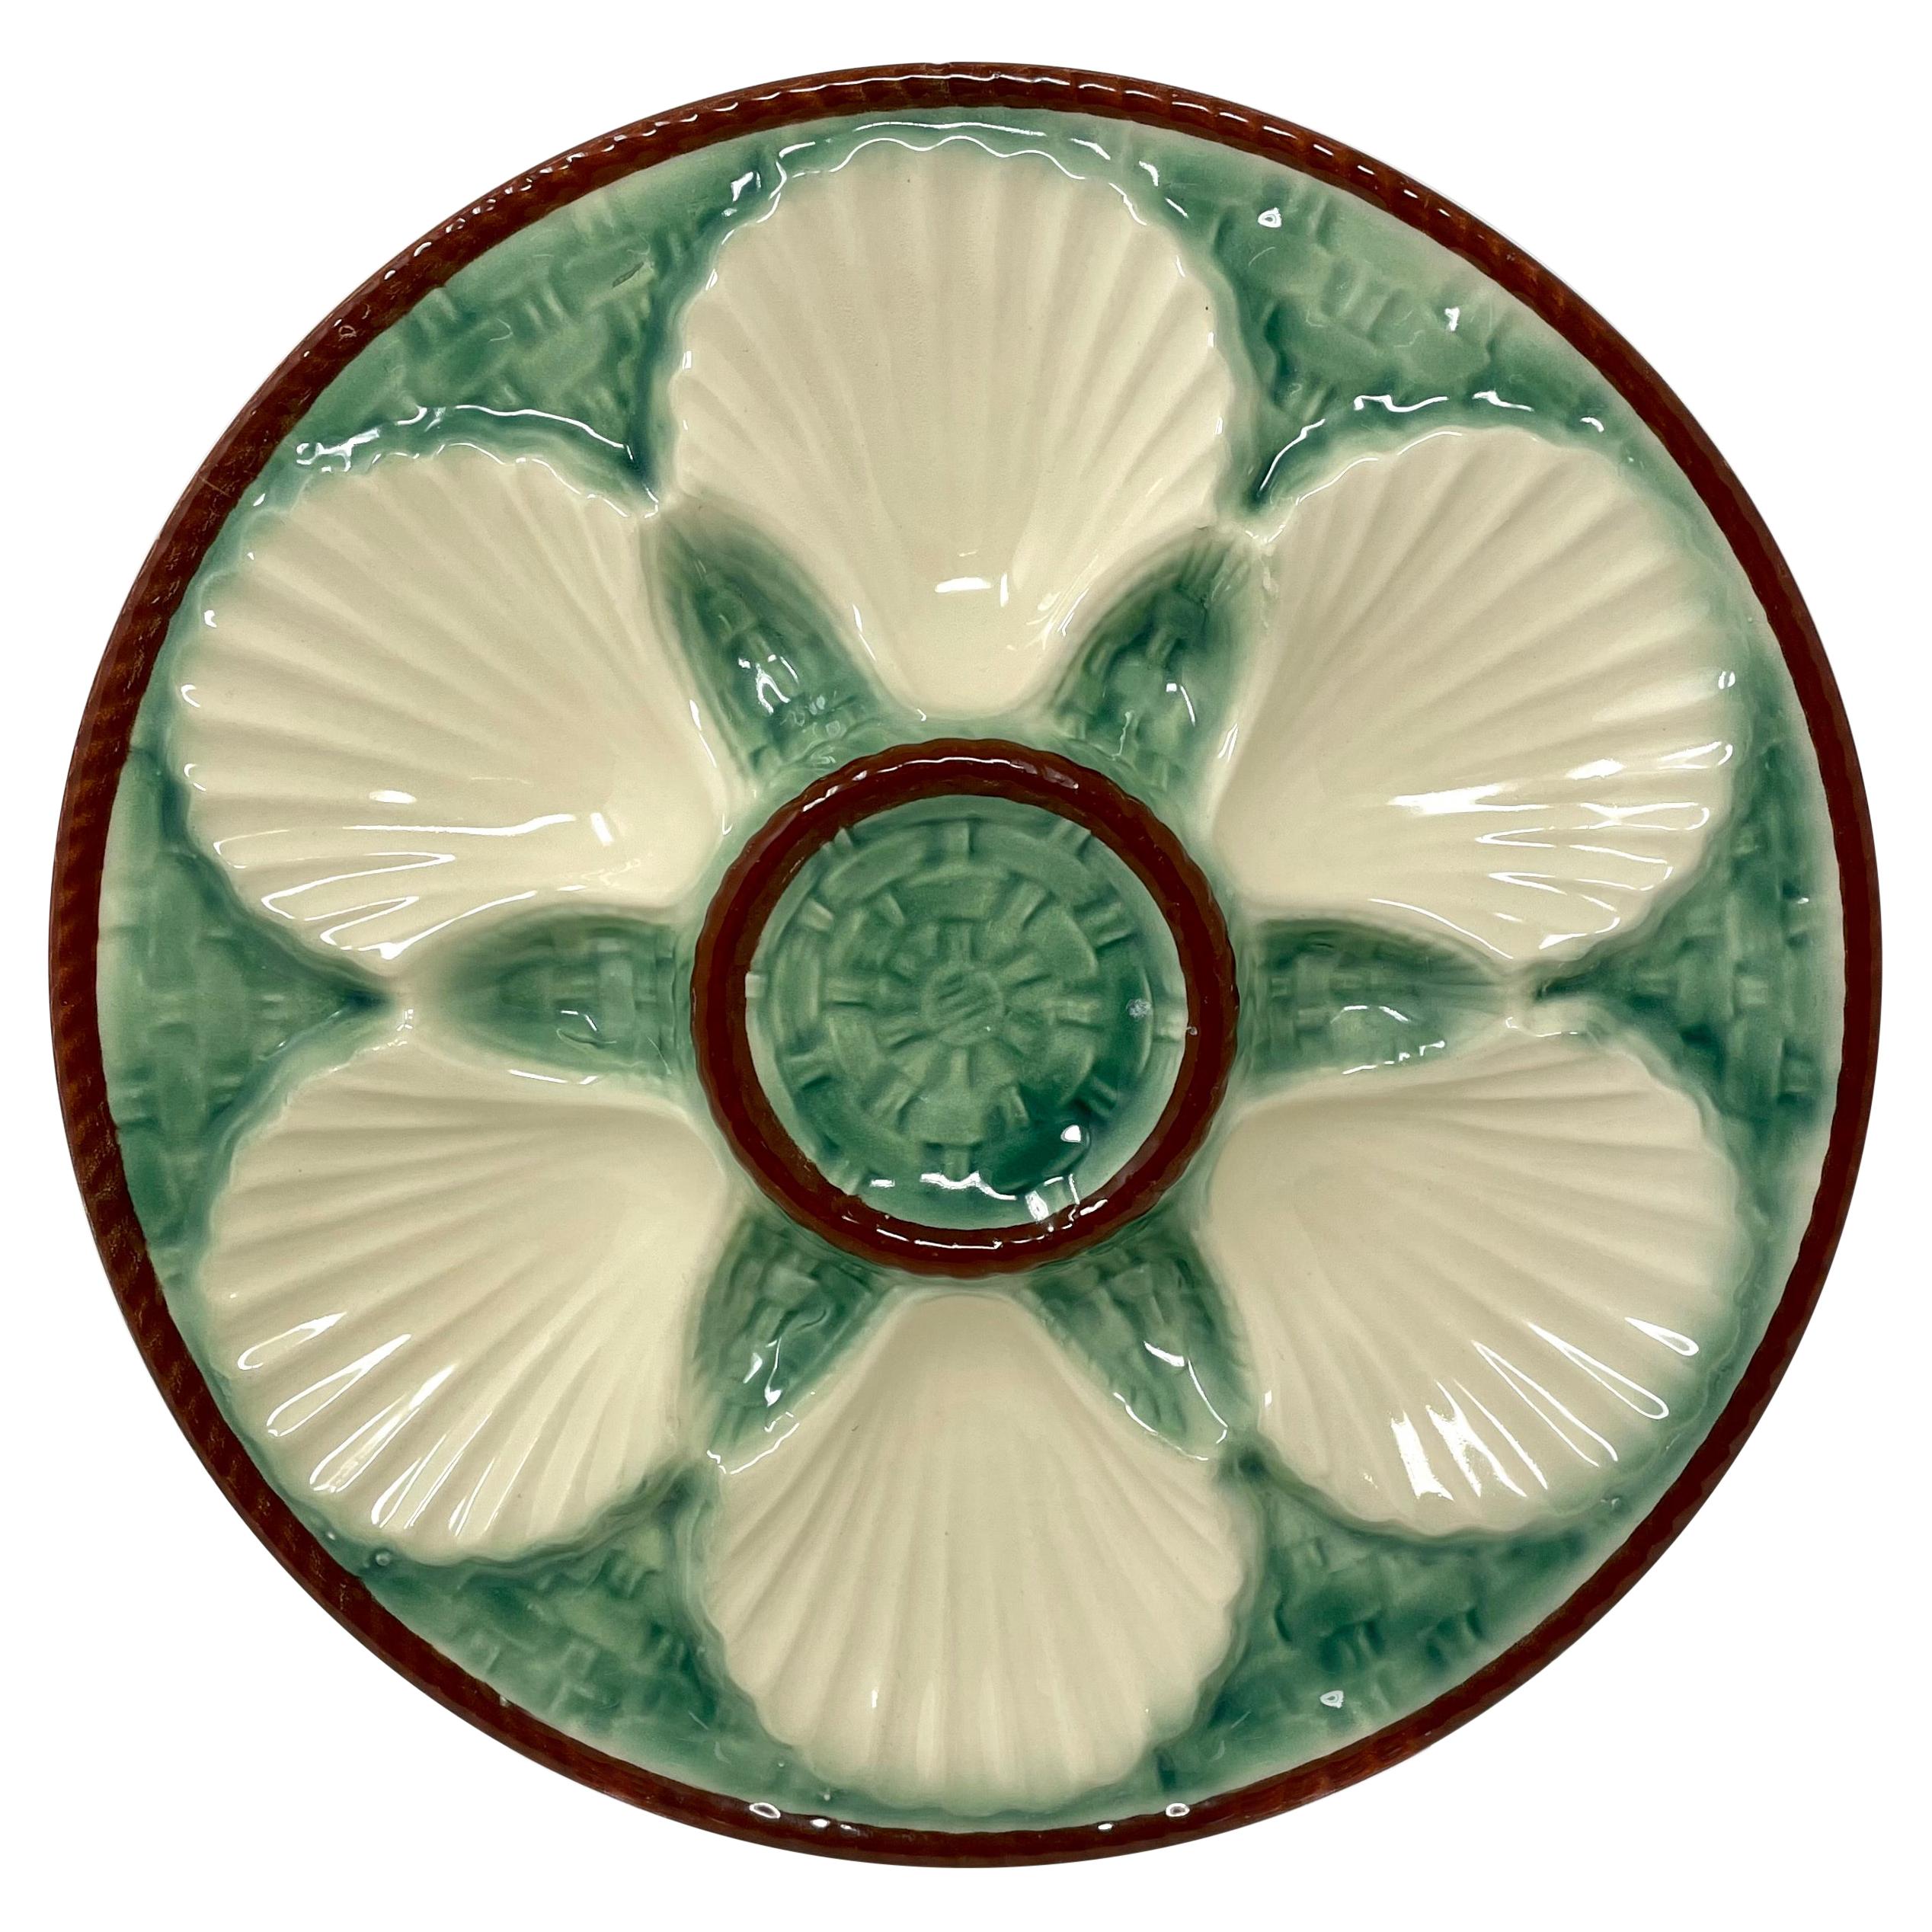 Estate French Faience Pottery Porcelain Oyster Plate by Longchamp, Circa 1930's